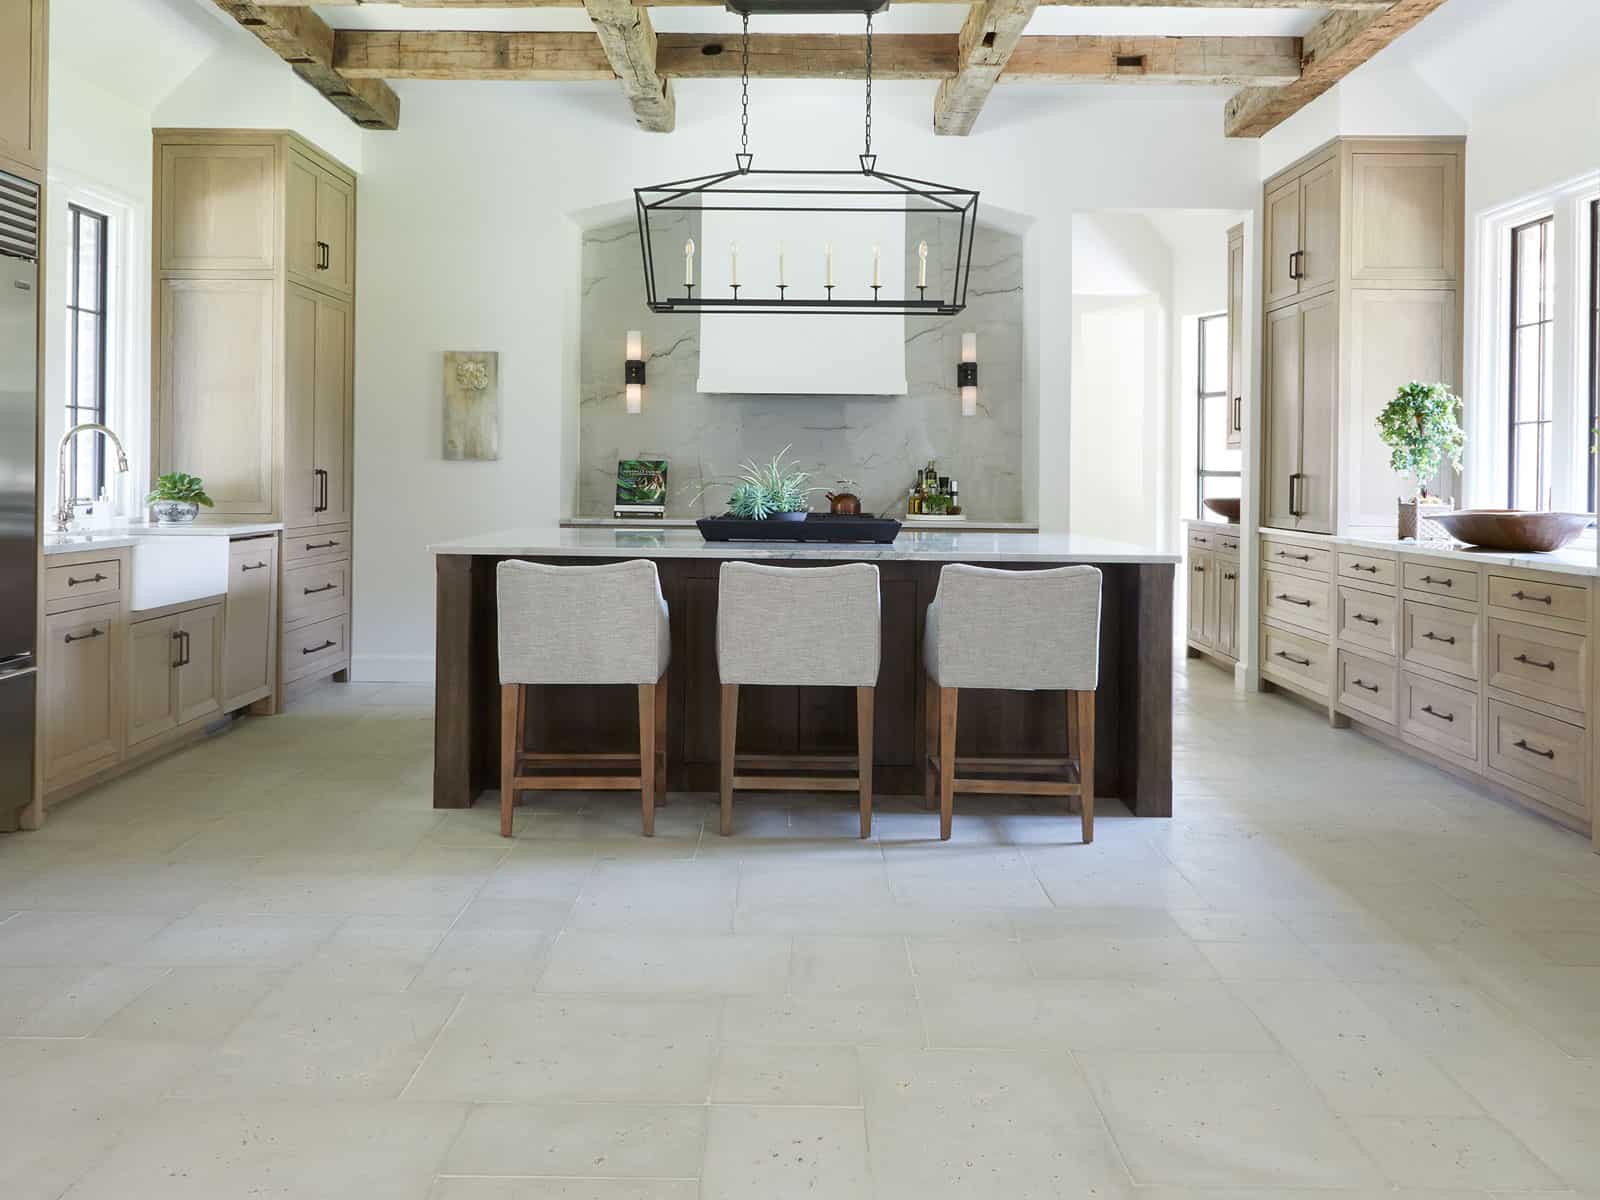 A rustic kitchen featuring oyster concrete pavers